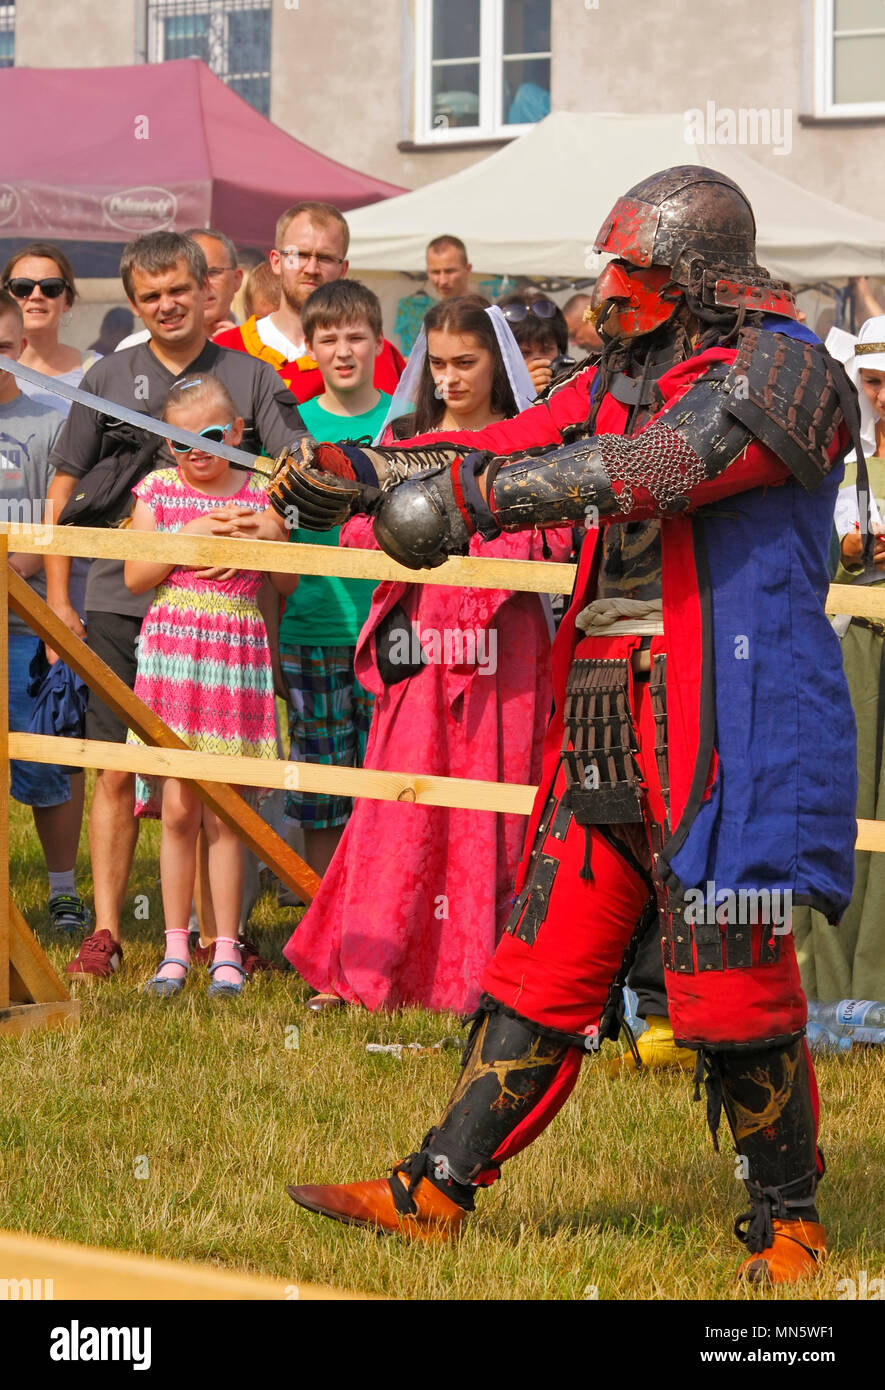 Warrior in Japanese armour. 'Knight's Tournament with Plum'. Szydlow, Poland, 23rd July 2017. Stock Photo